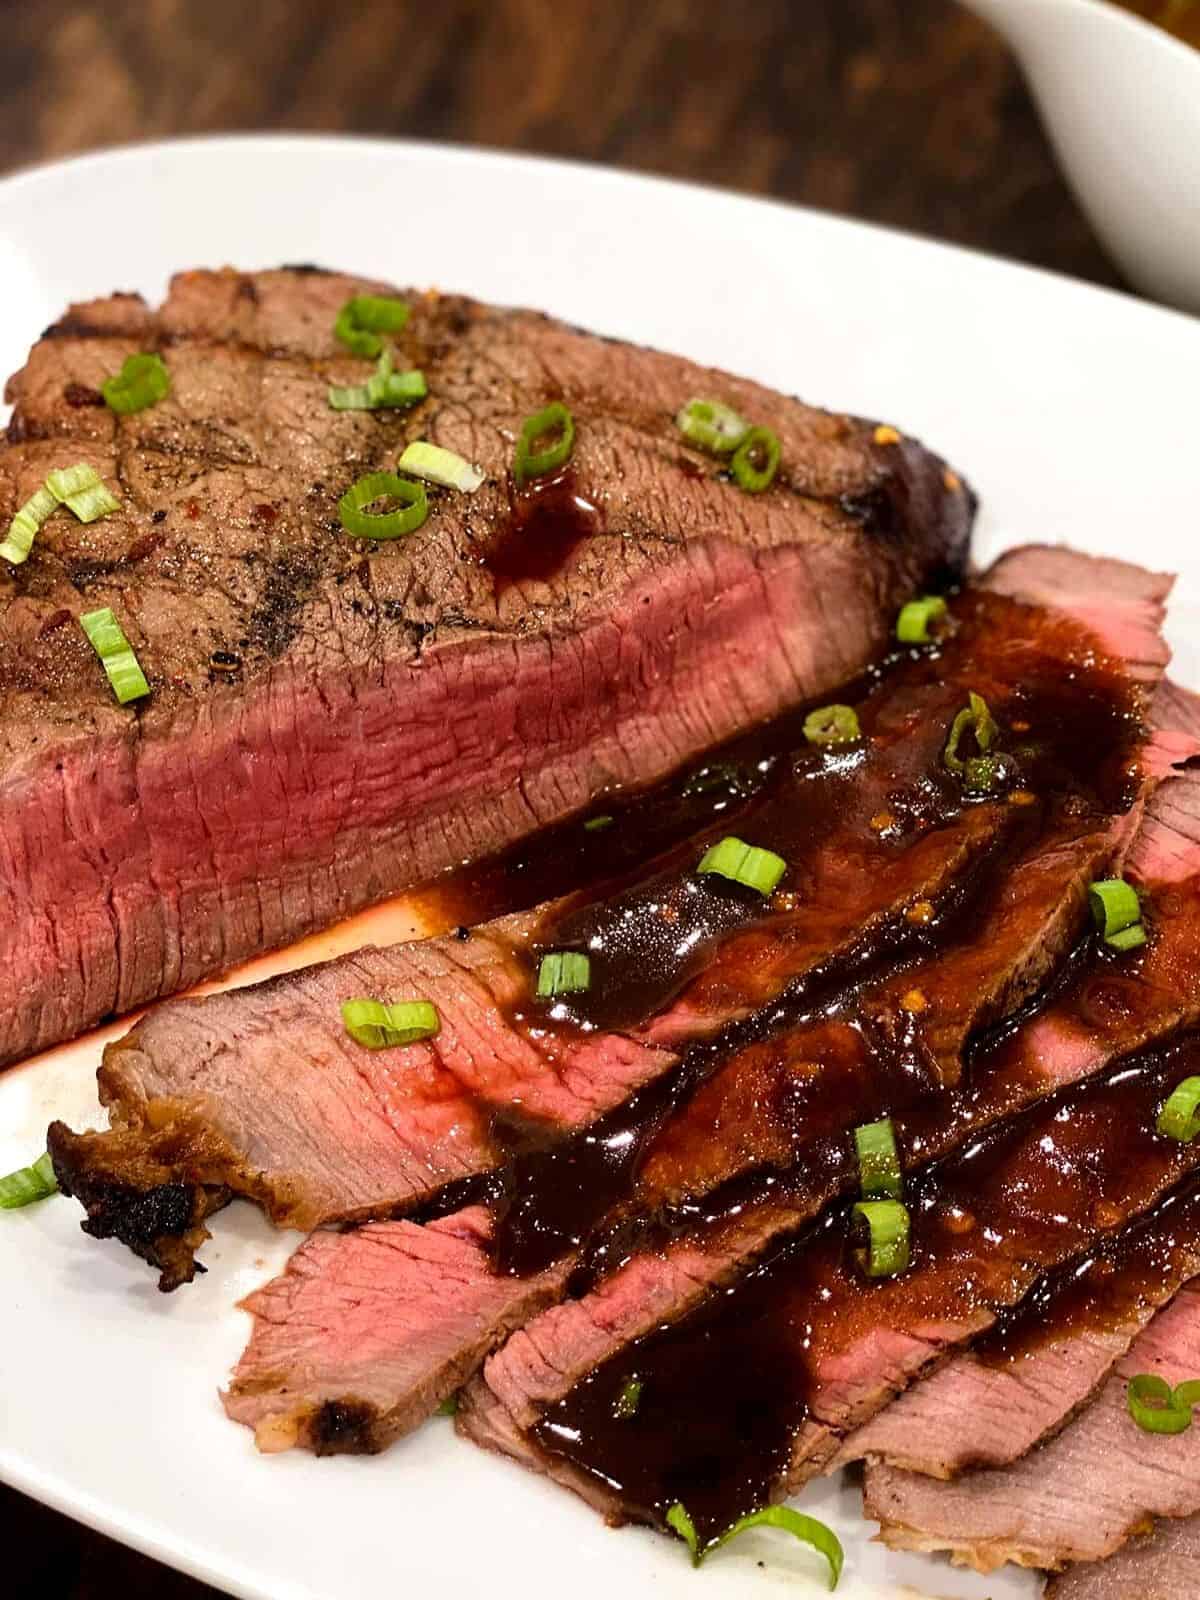 London broil sliced topped with marinade.